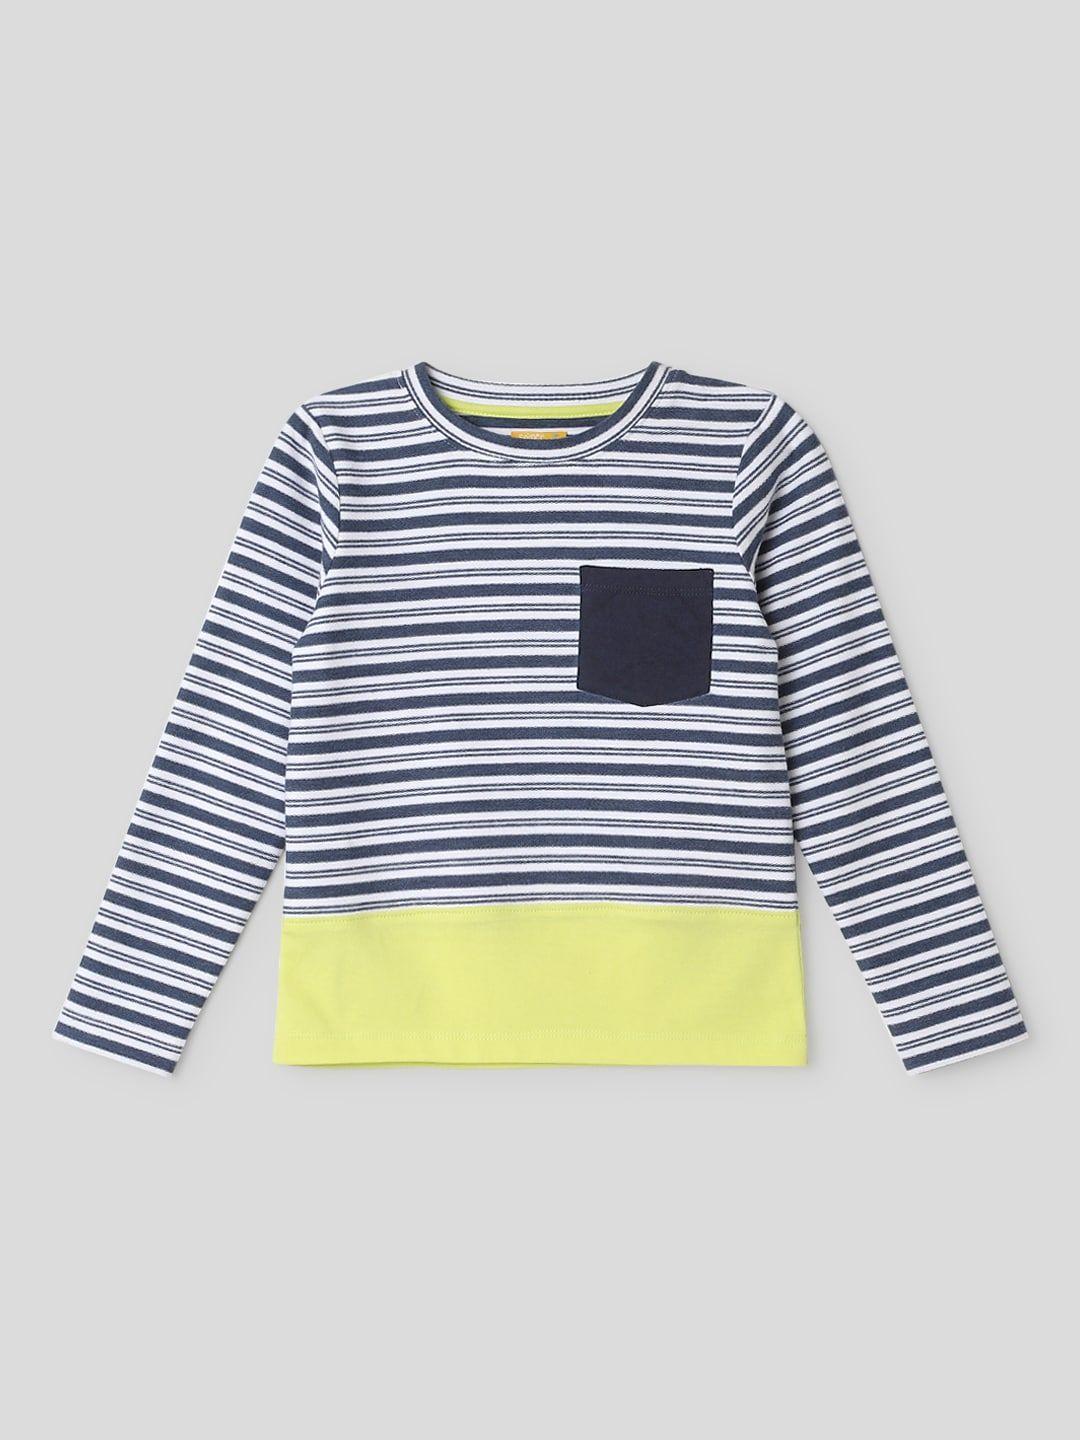 somersault boys striped round neck long sleeves pockets t-shirt